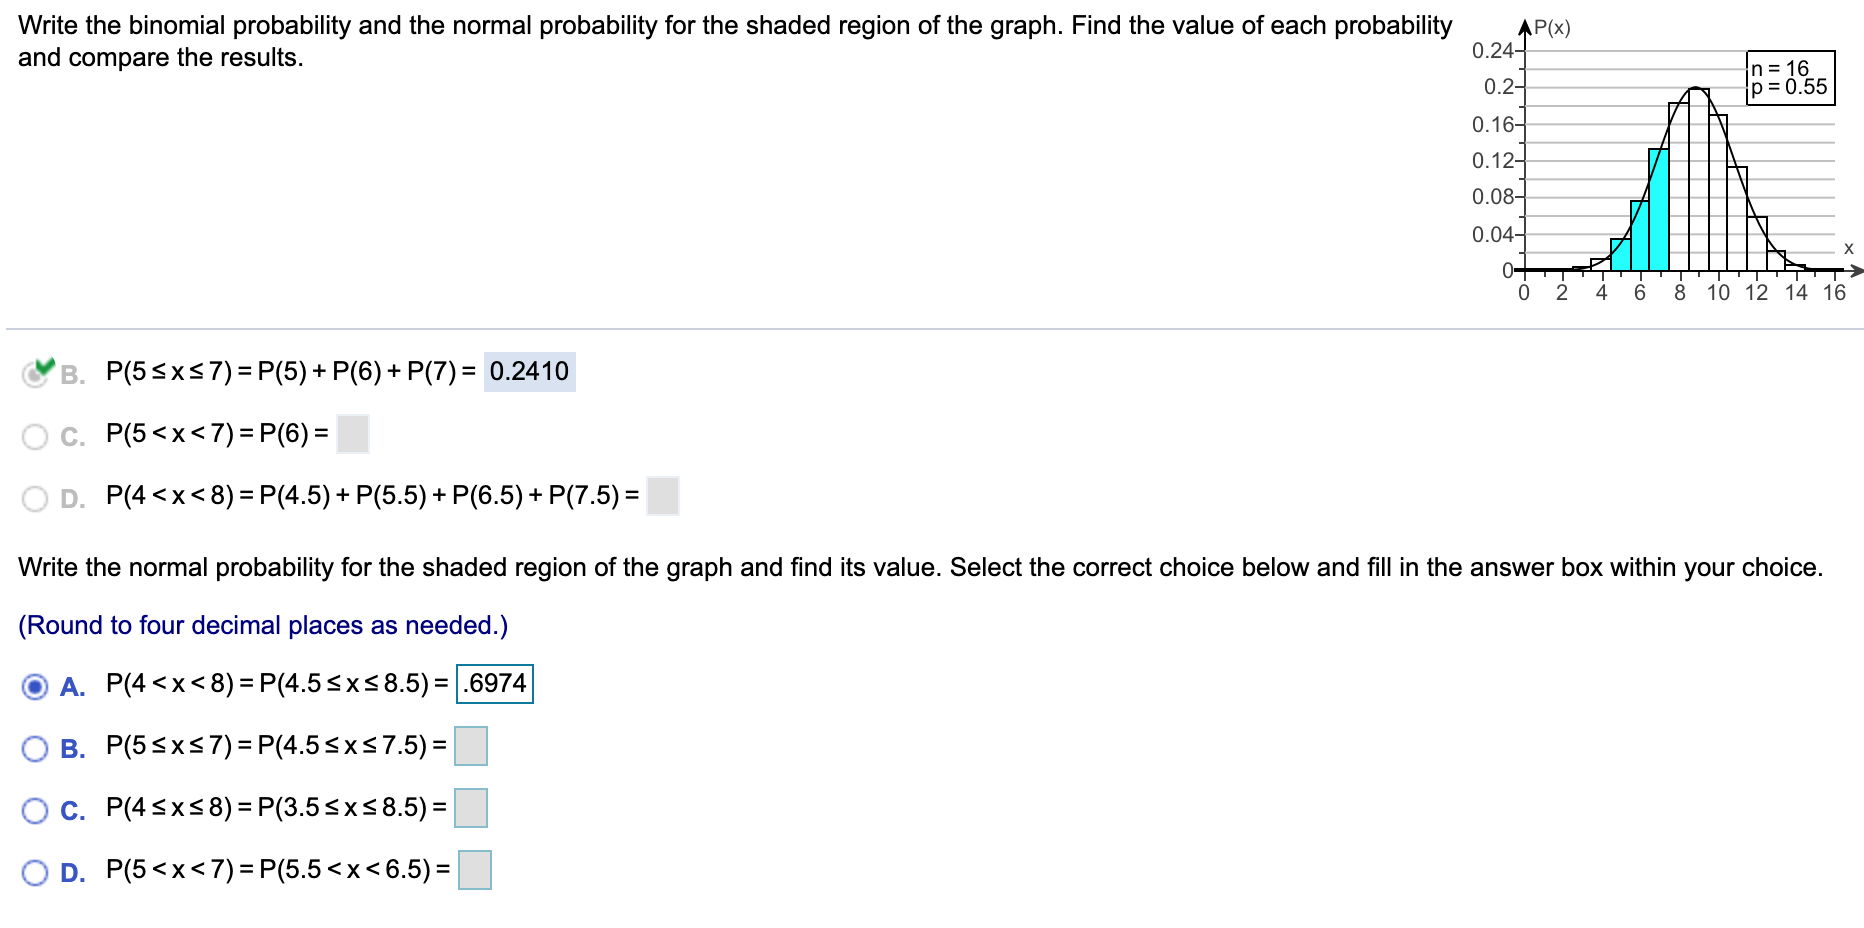 Write the binomial probability and the normal probability for the shaded region of the graph. Find the value of each probability
and compare the results.
AP(x)
0.24-
n = 16
p = 0.55
0.2-
0.16-
0.12-
0.08-
0.04–
X.
0+
2
4
6
8
10 12 14 16
B. P(5<xs7)= P(5) + P(6) + P(7) = 0.2410
c. P(5<x<7) =P(6) =
D. P(4 <x<8) = P(4.5)+ P(5.5) + P(6.5) + P(7.5) =
Write the normal probability for the shaded region of the graph and find its value. Select the correct choice below and fill in the answer box within your choice.
(Round to four decimal places as needed.)
A. P(4 <x<8) = P(4.5<x<8.5) = |.6974
%3D
B. P(5<x<7) = P(4.5<x<7.5) =
%3D
Oc. P(4<xs8) = P(3.5<x<8.5) =
O D. P(5<x<7) = P(5.5<x<6.5)=
